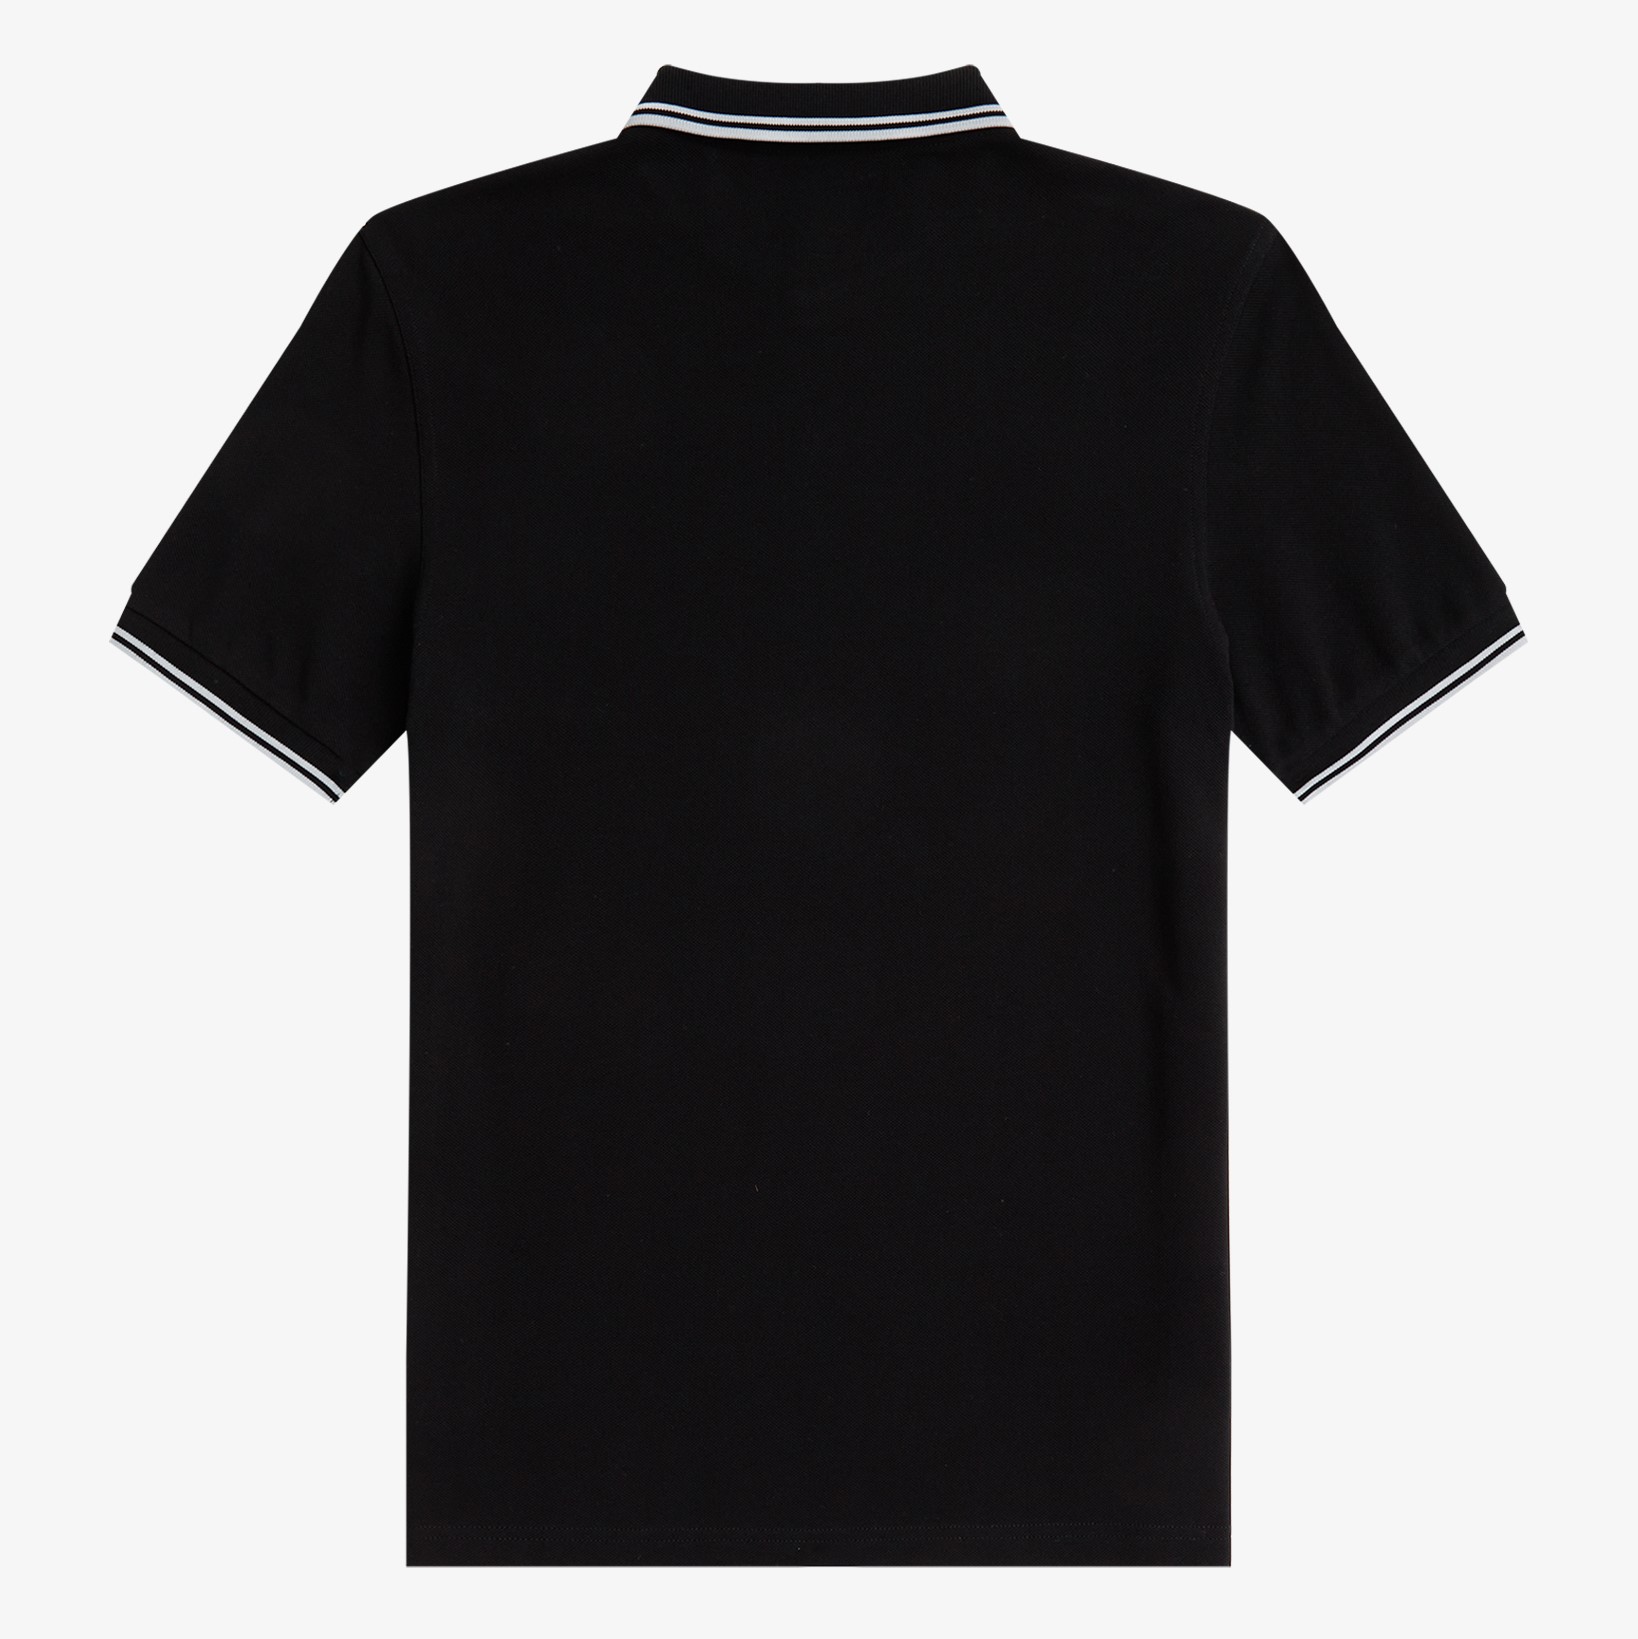 Fred Perry - TWIN TIPPED POLO SHIRT - Black/White/White